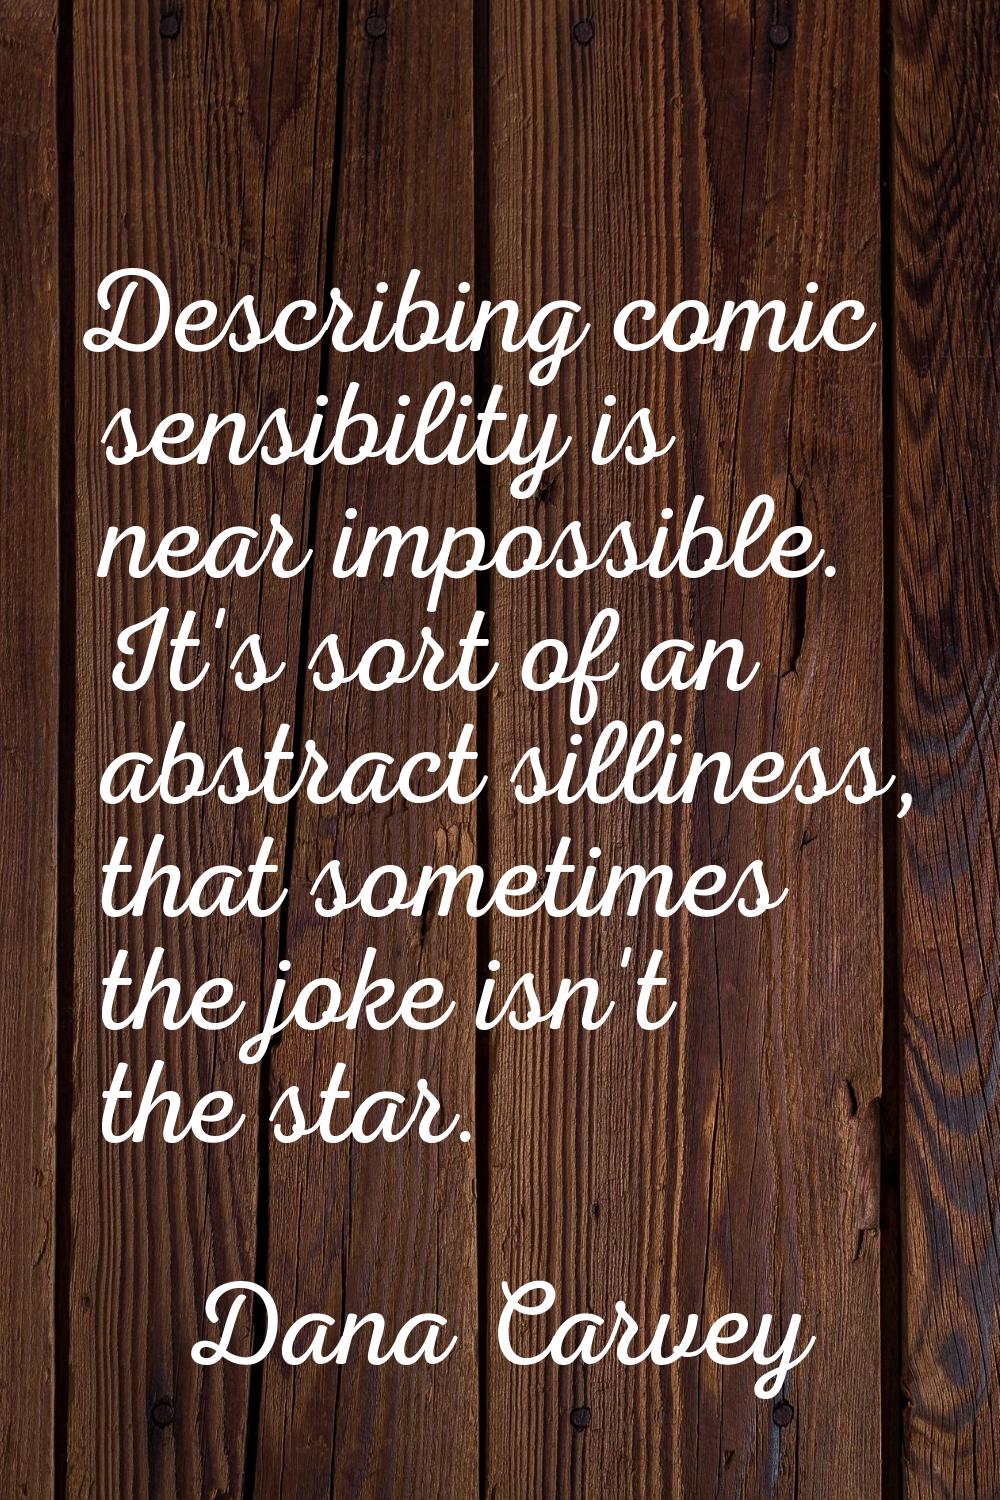 Describing comic sensibility is near impossible. It's sort of an abstract silliness, that sometimes